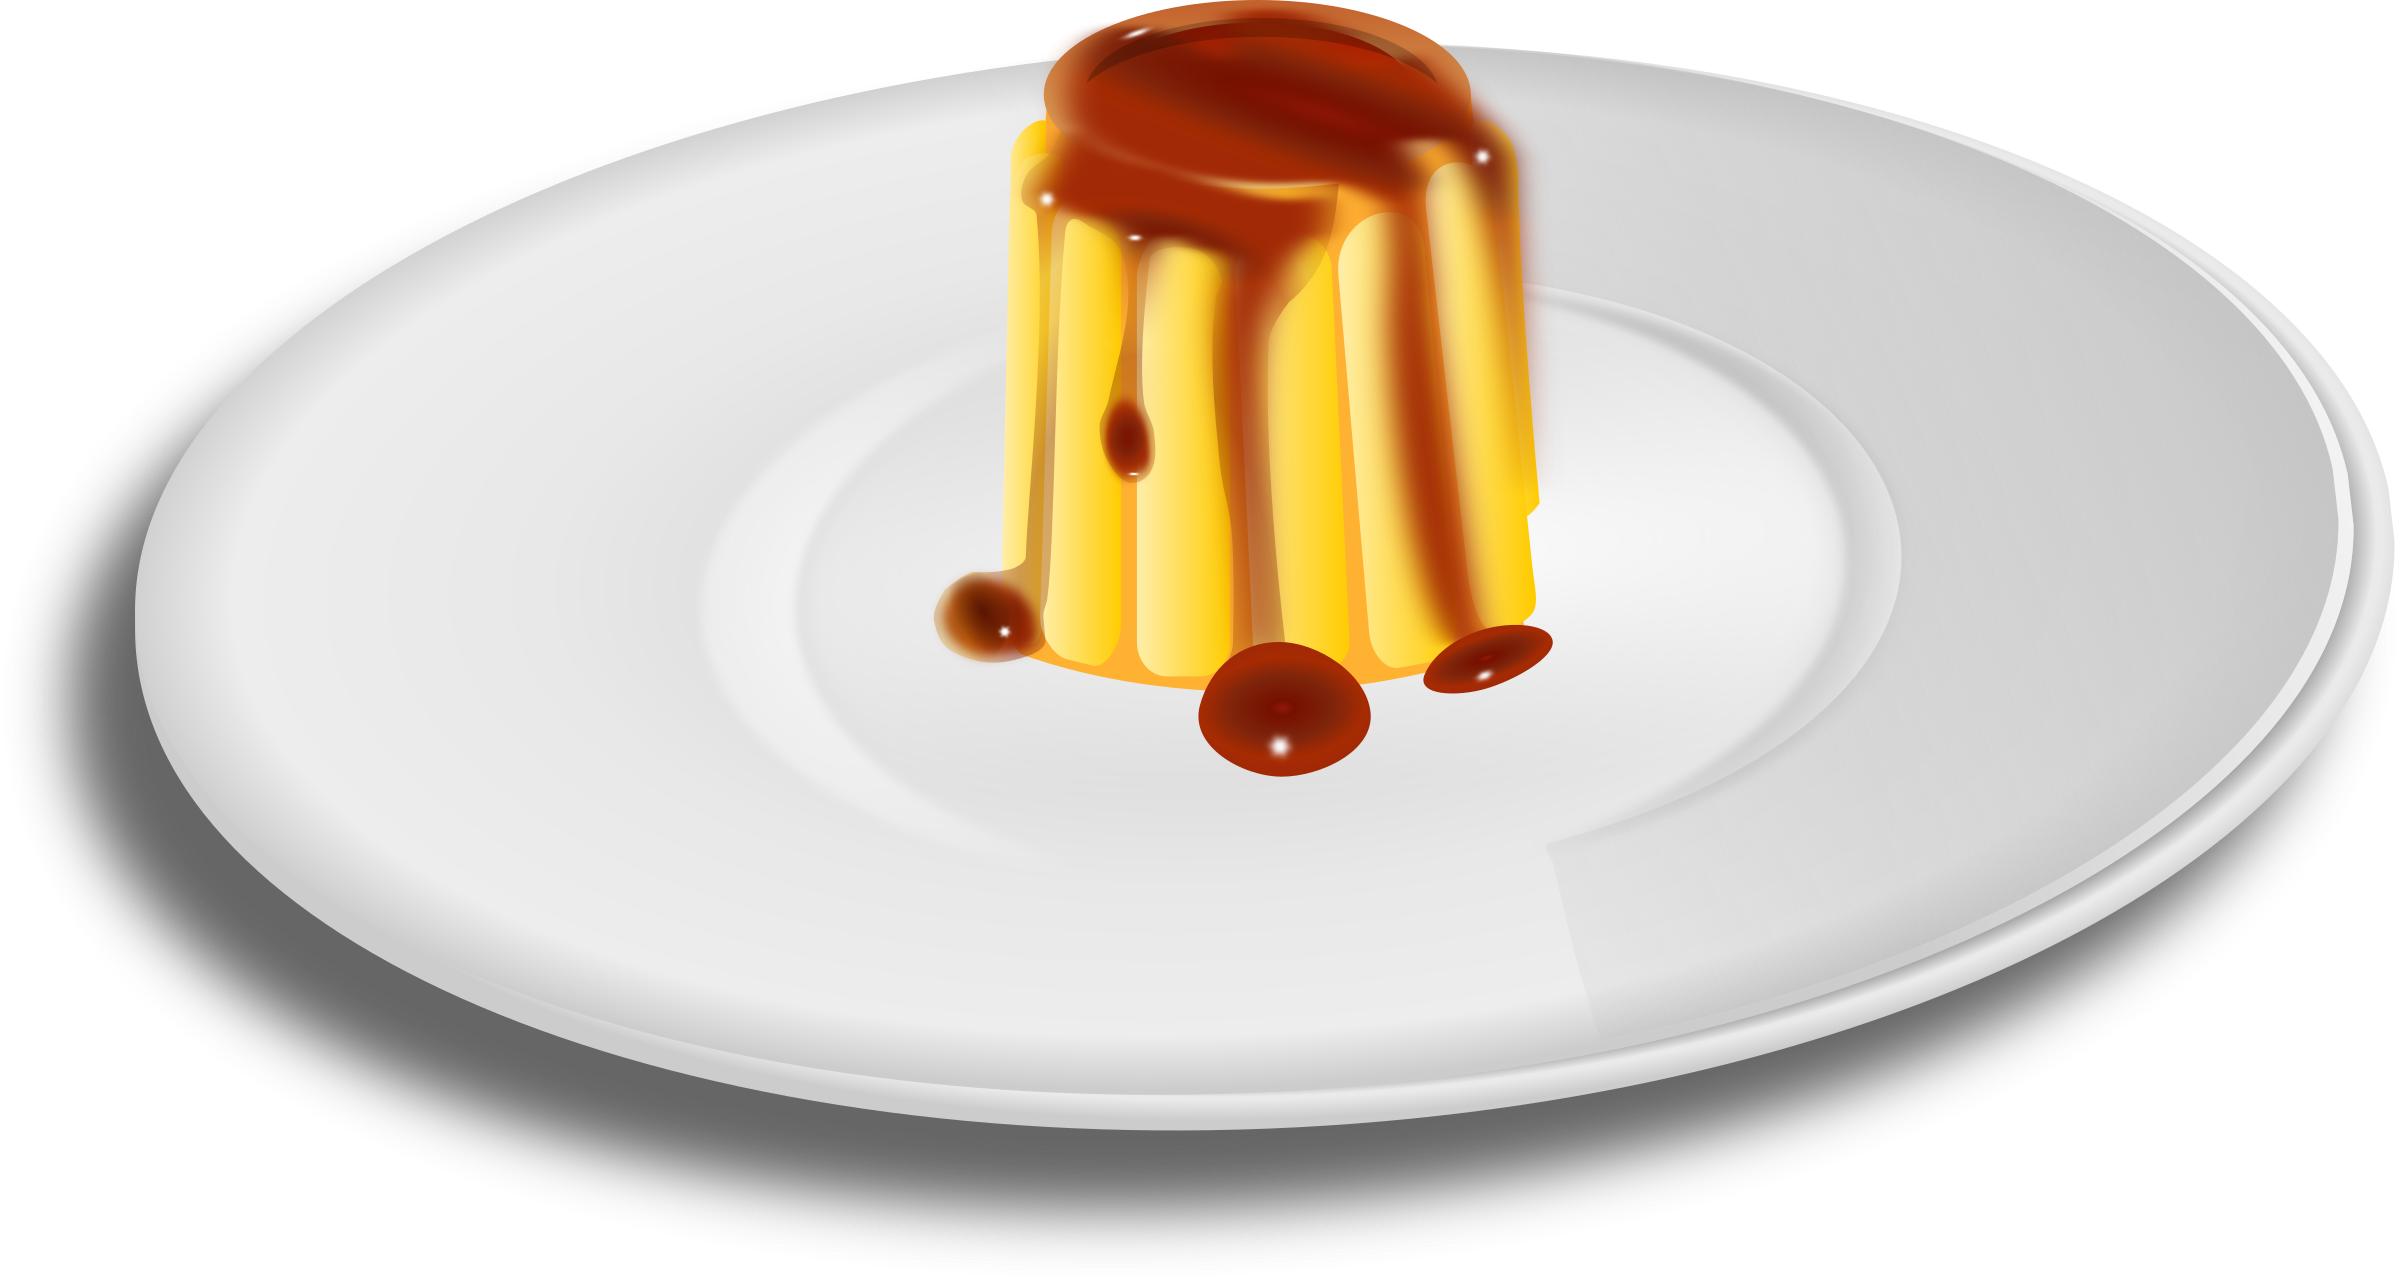 Creme Caramel on plate png